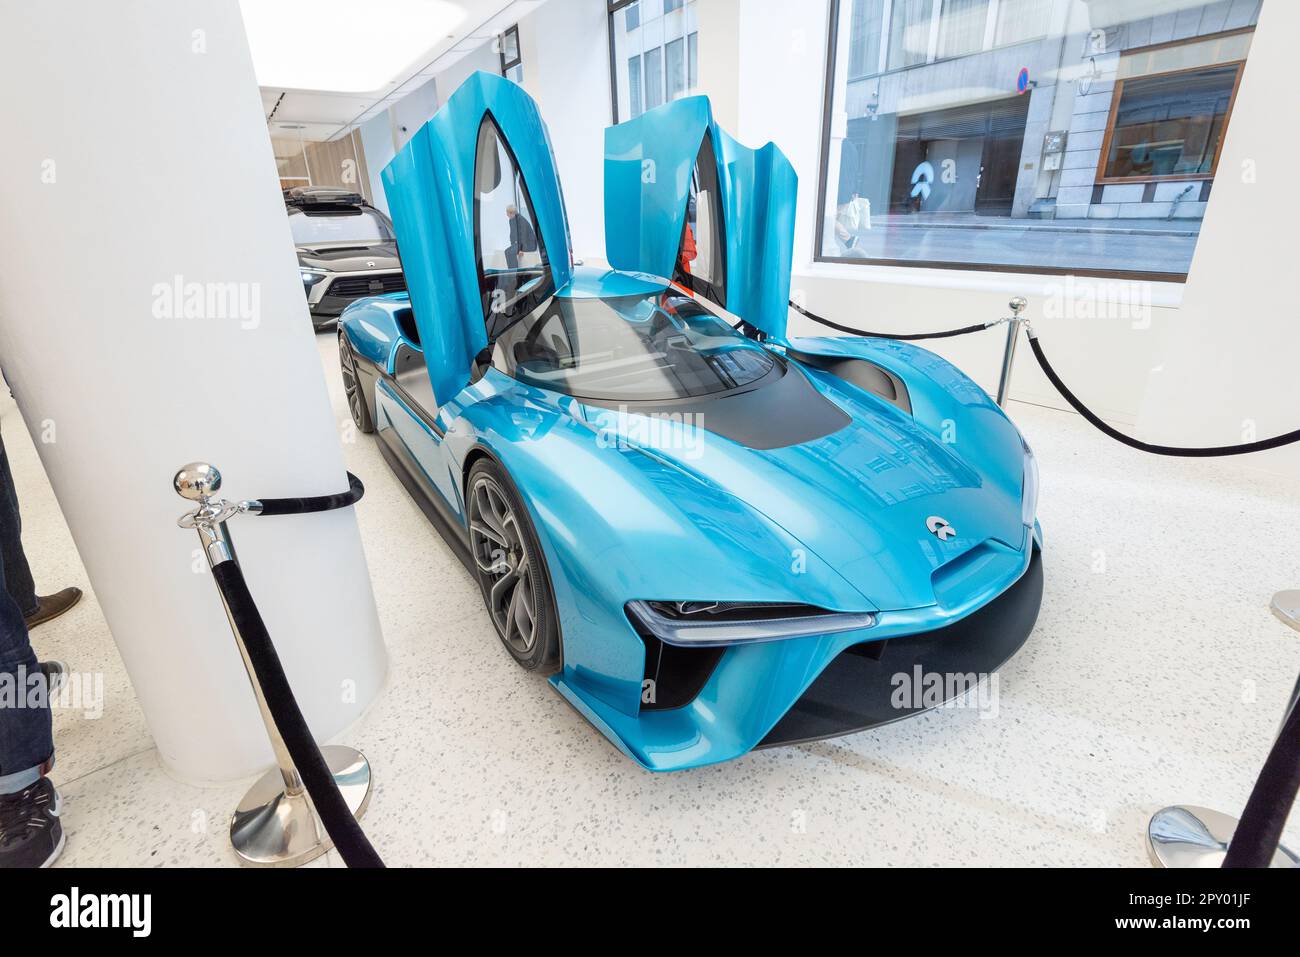 Oslo, Norway - October 13 2021: NIO EP9 electric sports car on display at NIO House in Oslo. Stock Photo